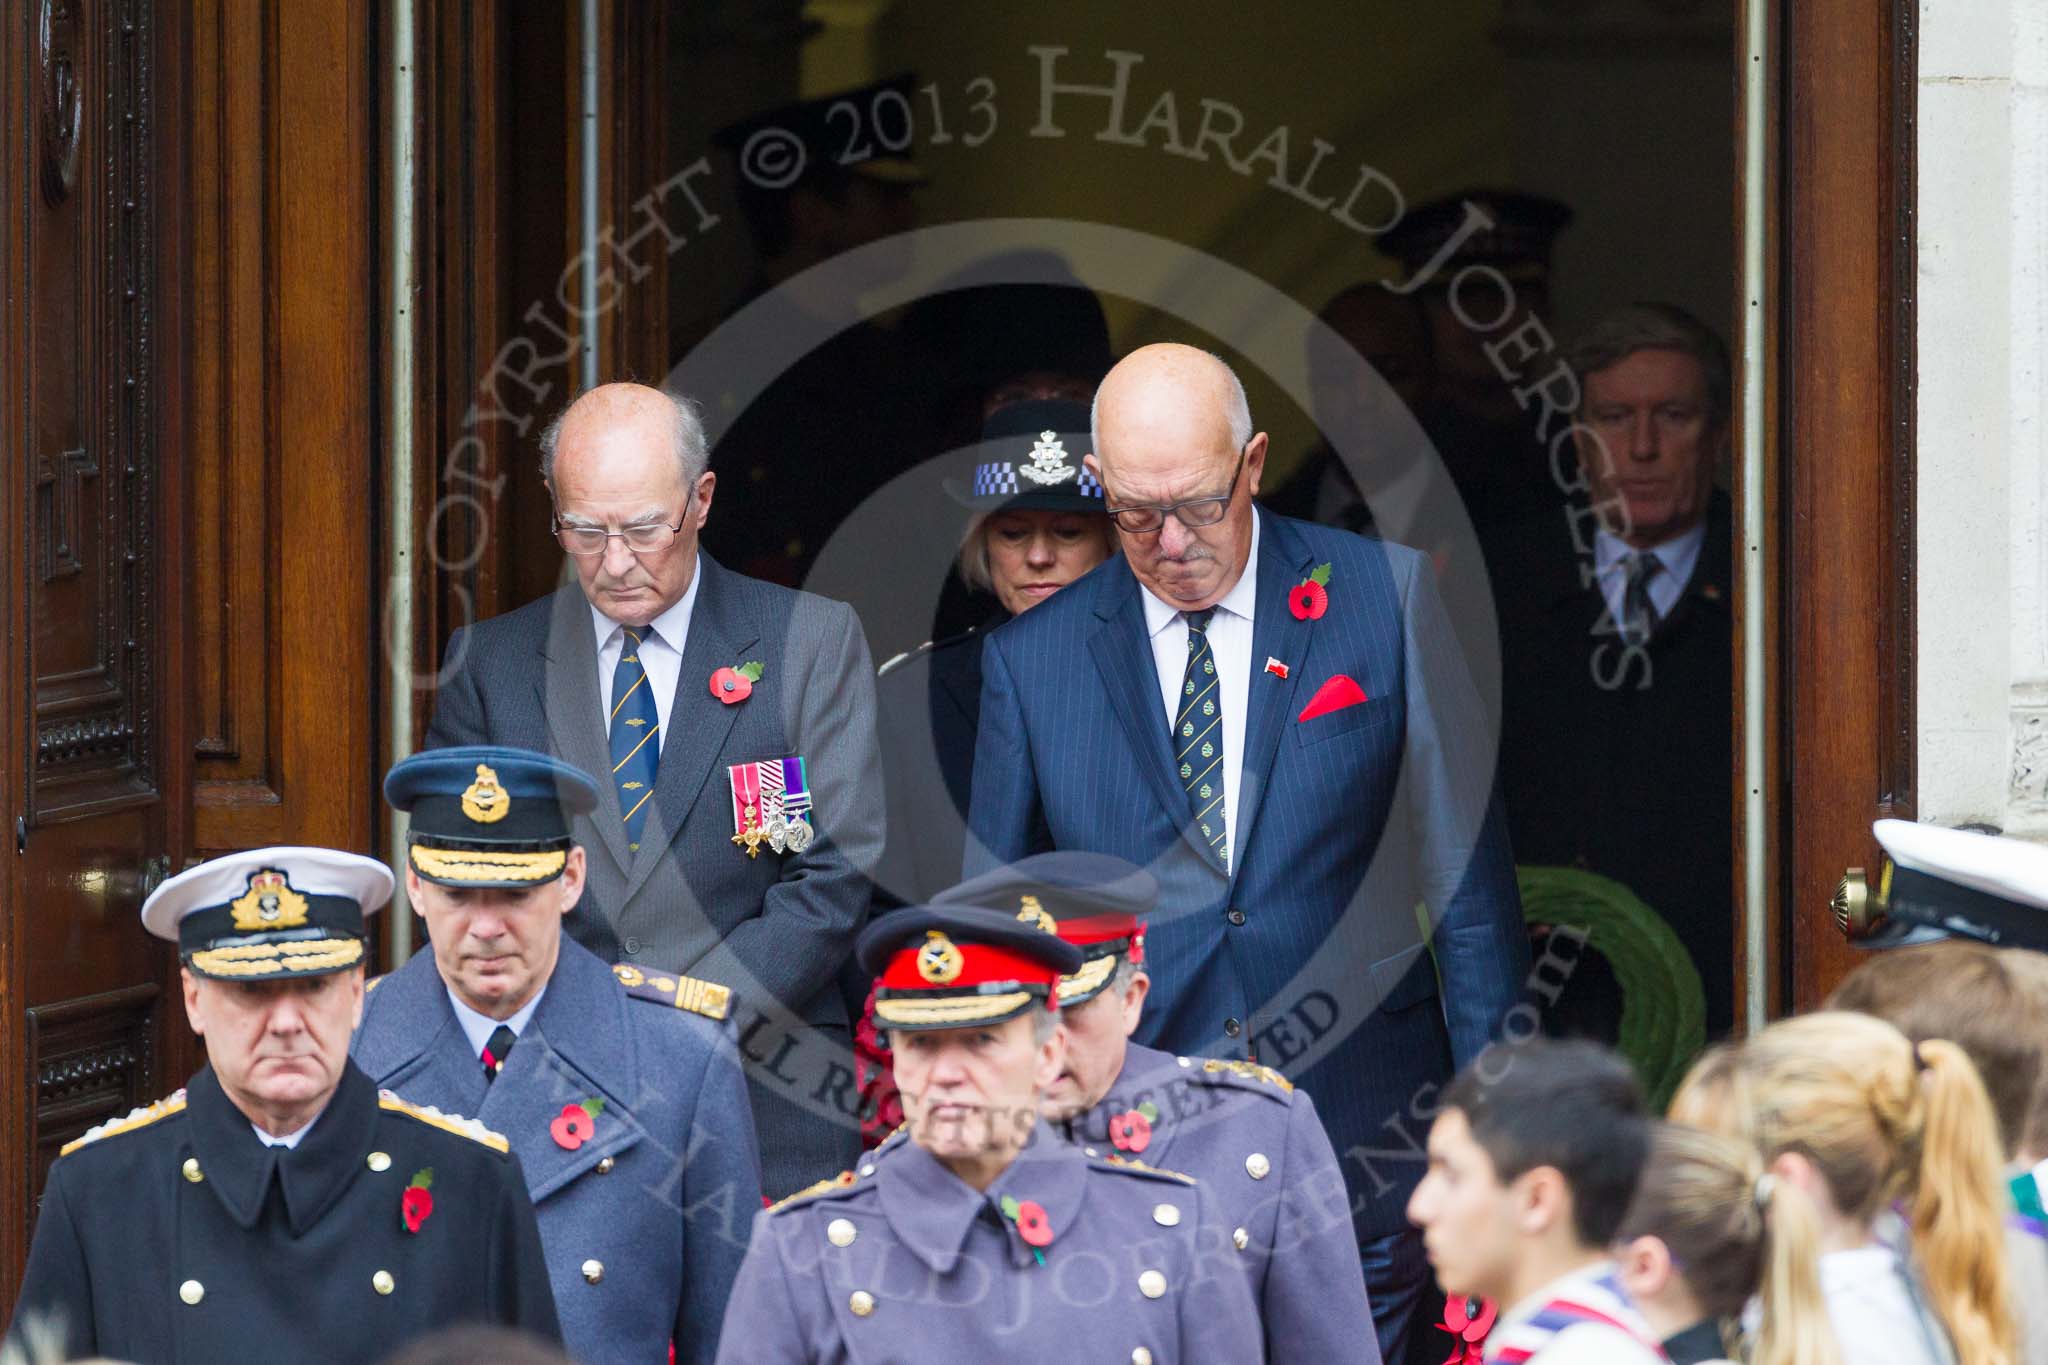 Remembrance Sunday at the Cenotaph 2015: Senior military personell leaving the Foreign- and Commonwealth Office, in front the First Sea Lord, Admiral  Sir  George  Zambellas, and the Chief of the Defence Staff, General  Sir  Nicholas  Houghton. Behind them the Chief of Air Staff, Air  Chief  Marshall  Sir  Andrew  Pulford, next to him the Chief of the General Staff, General Sir Nicholas
Carter. Behind them Air Commodore John Lumsden, Captain Jim Conybeare,and Sara Thornton, HM Government’s National
Police Chief's Council Chair. Image #92, 08 November 2015 10:55 Whitehall, London, UK